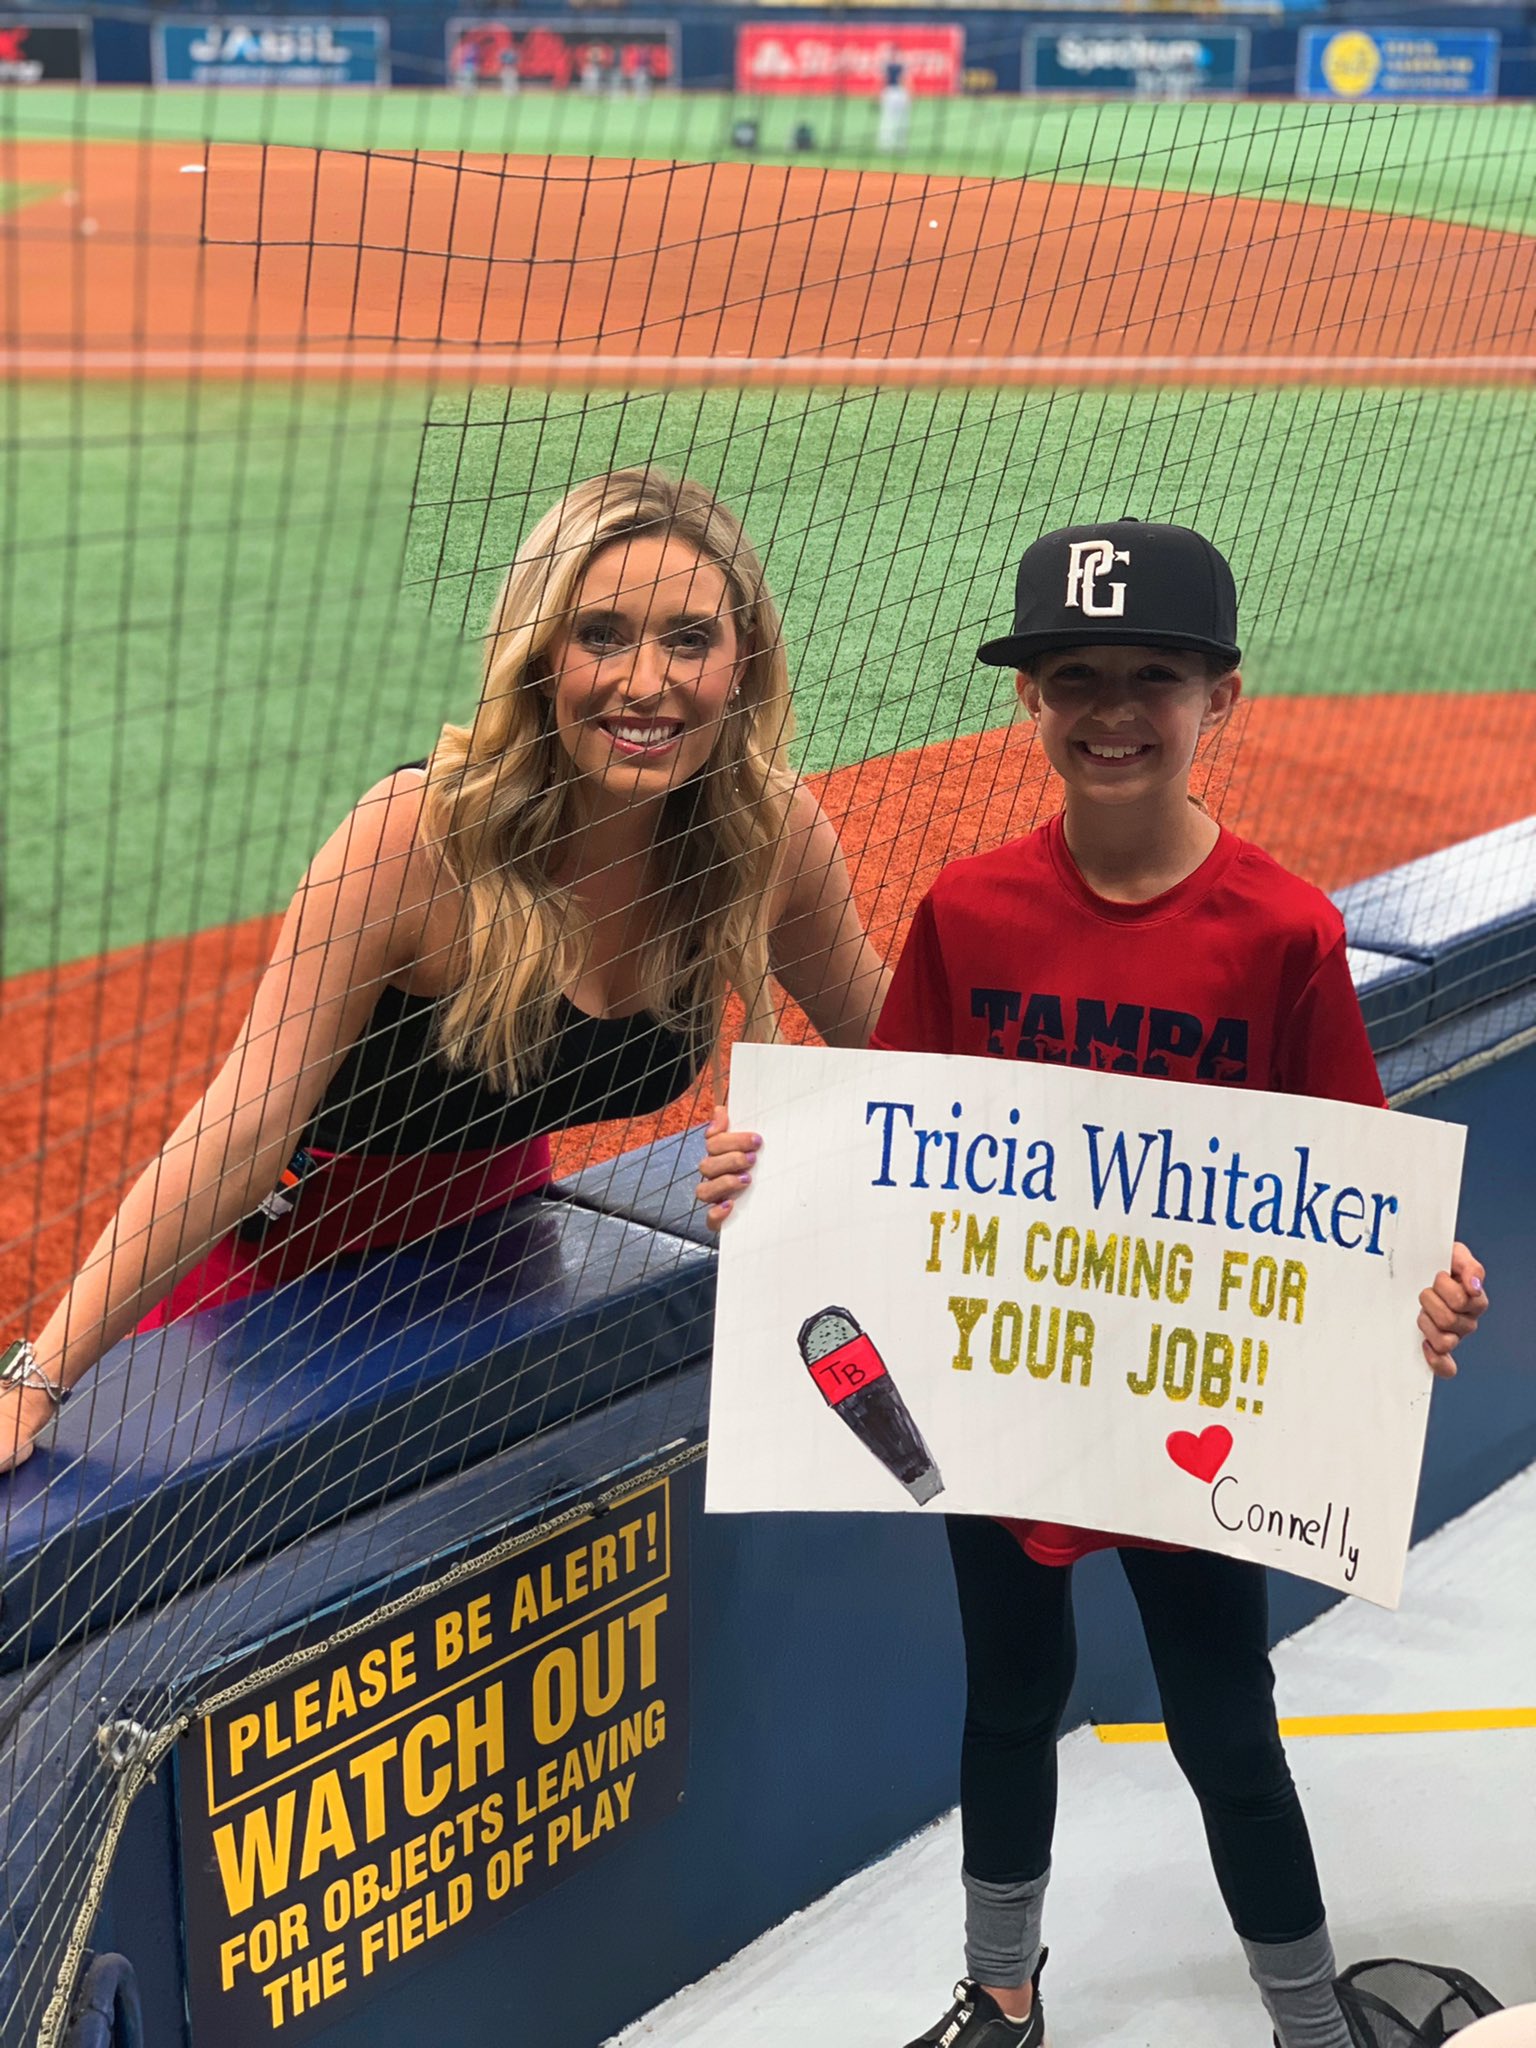 Tricia Whitaker on X: Heart = melted 💕 Love seeing young girls w/ dreams  of being in baseball & lemme tell ya, Connelly will come for my job.  Her fav players are